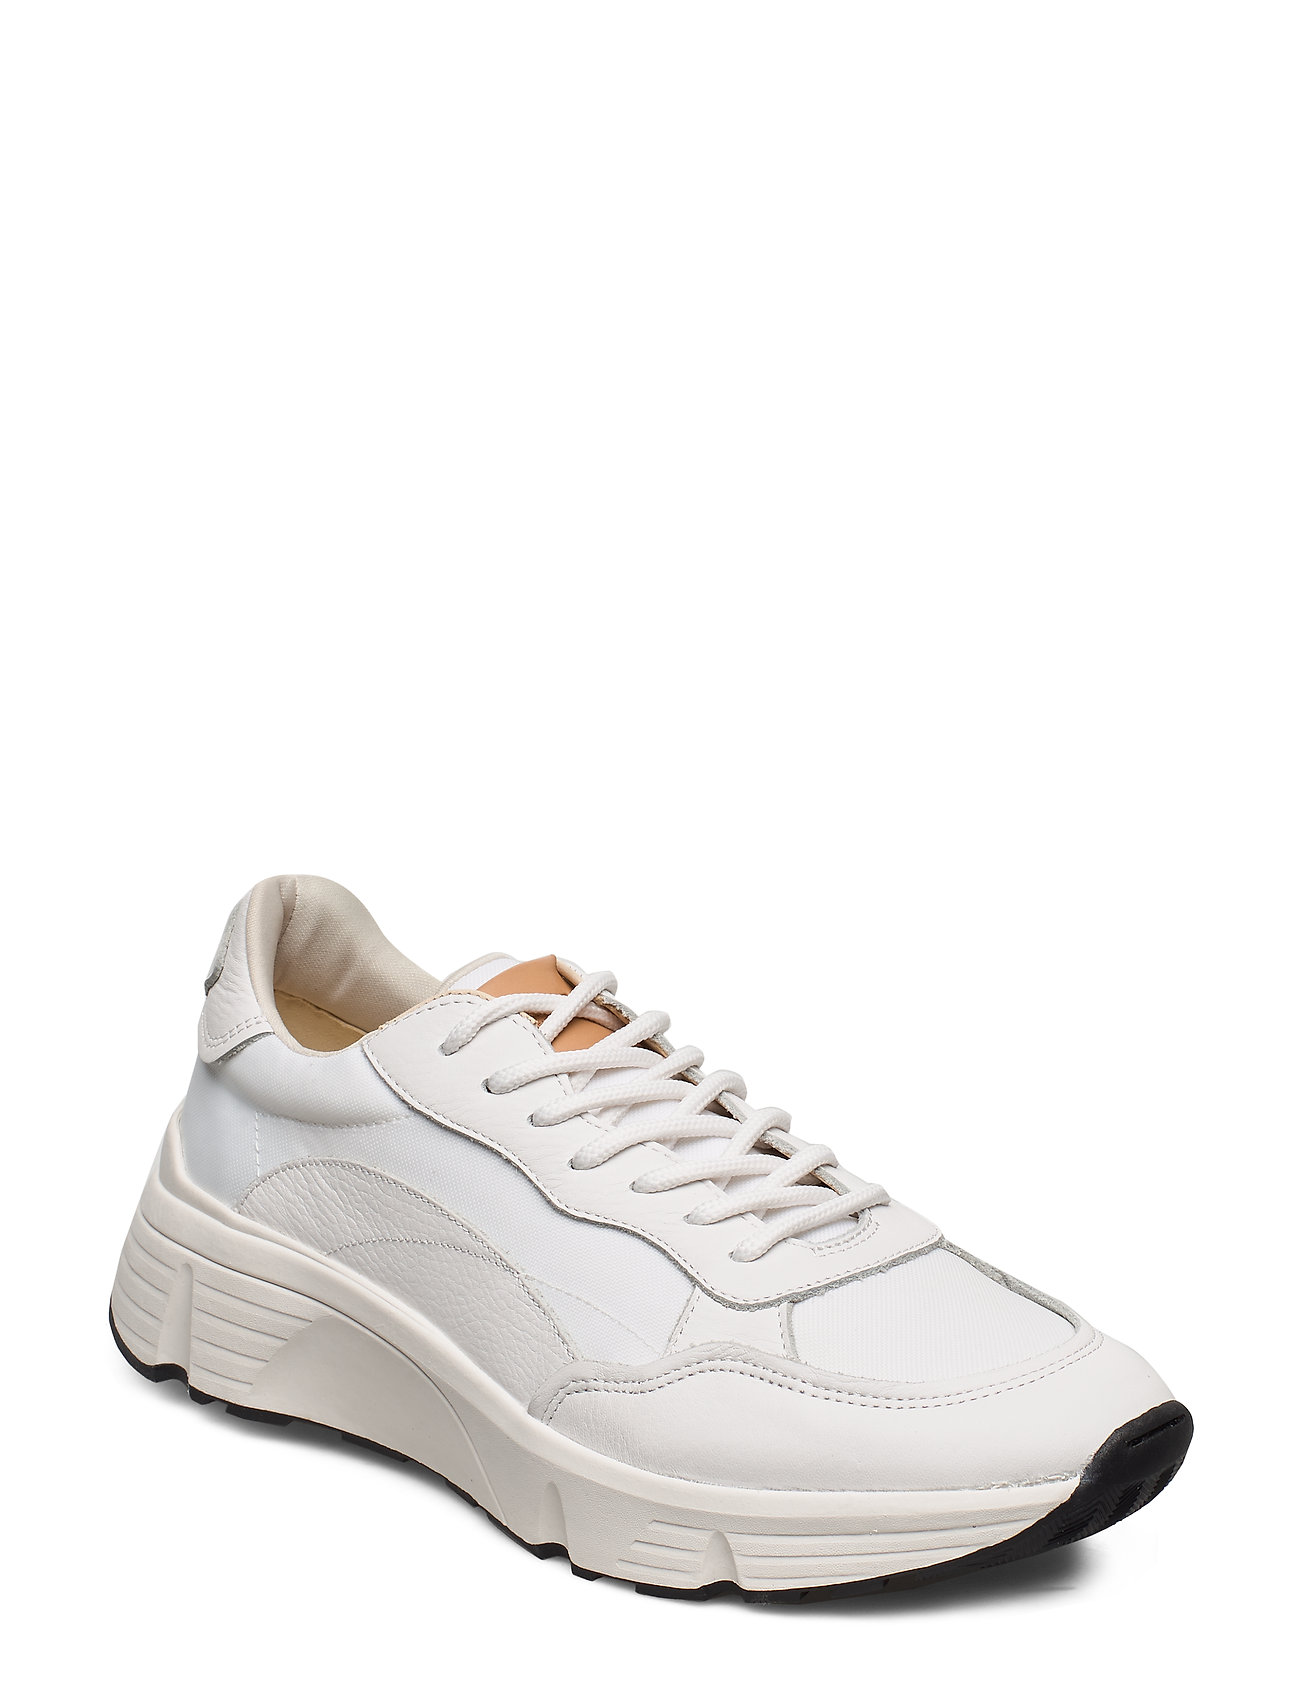 Quincy Low-top Sneakers White VAGABOND